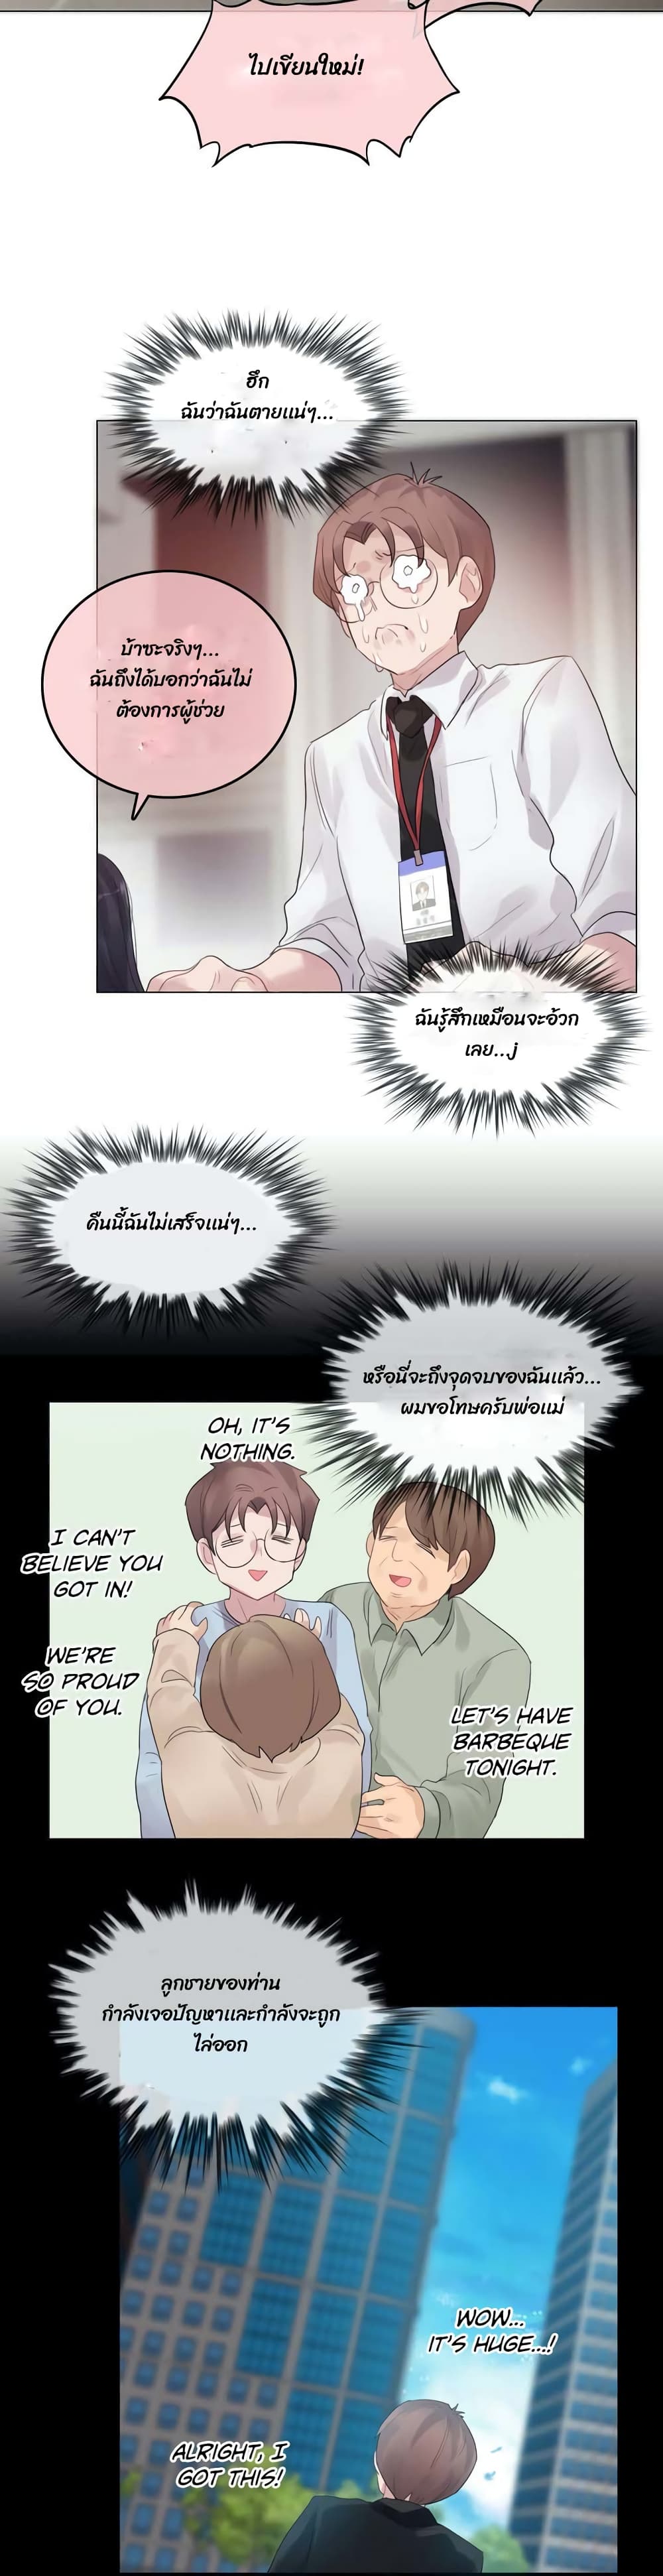 A Pervert's Daily Life 92 (21)